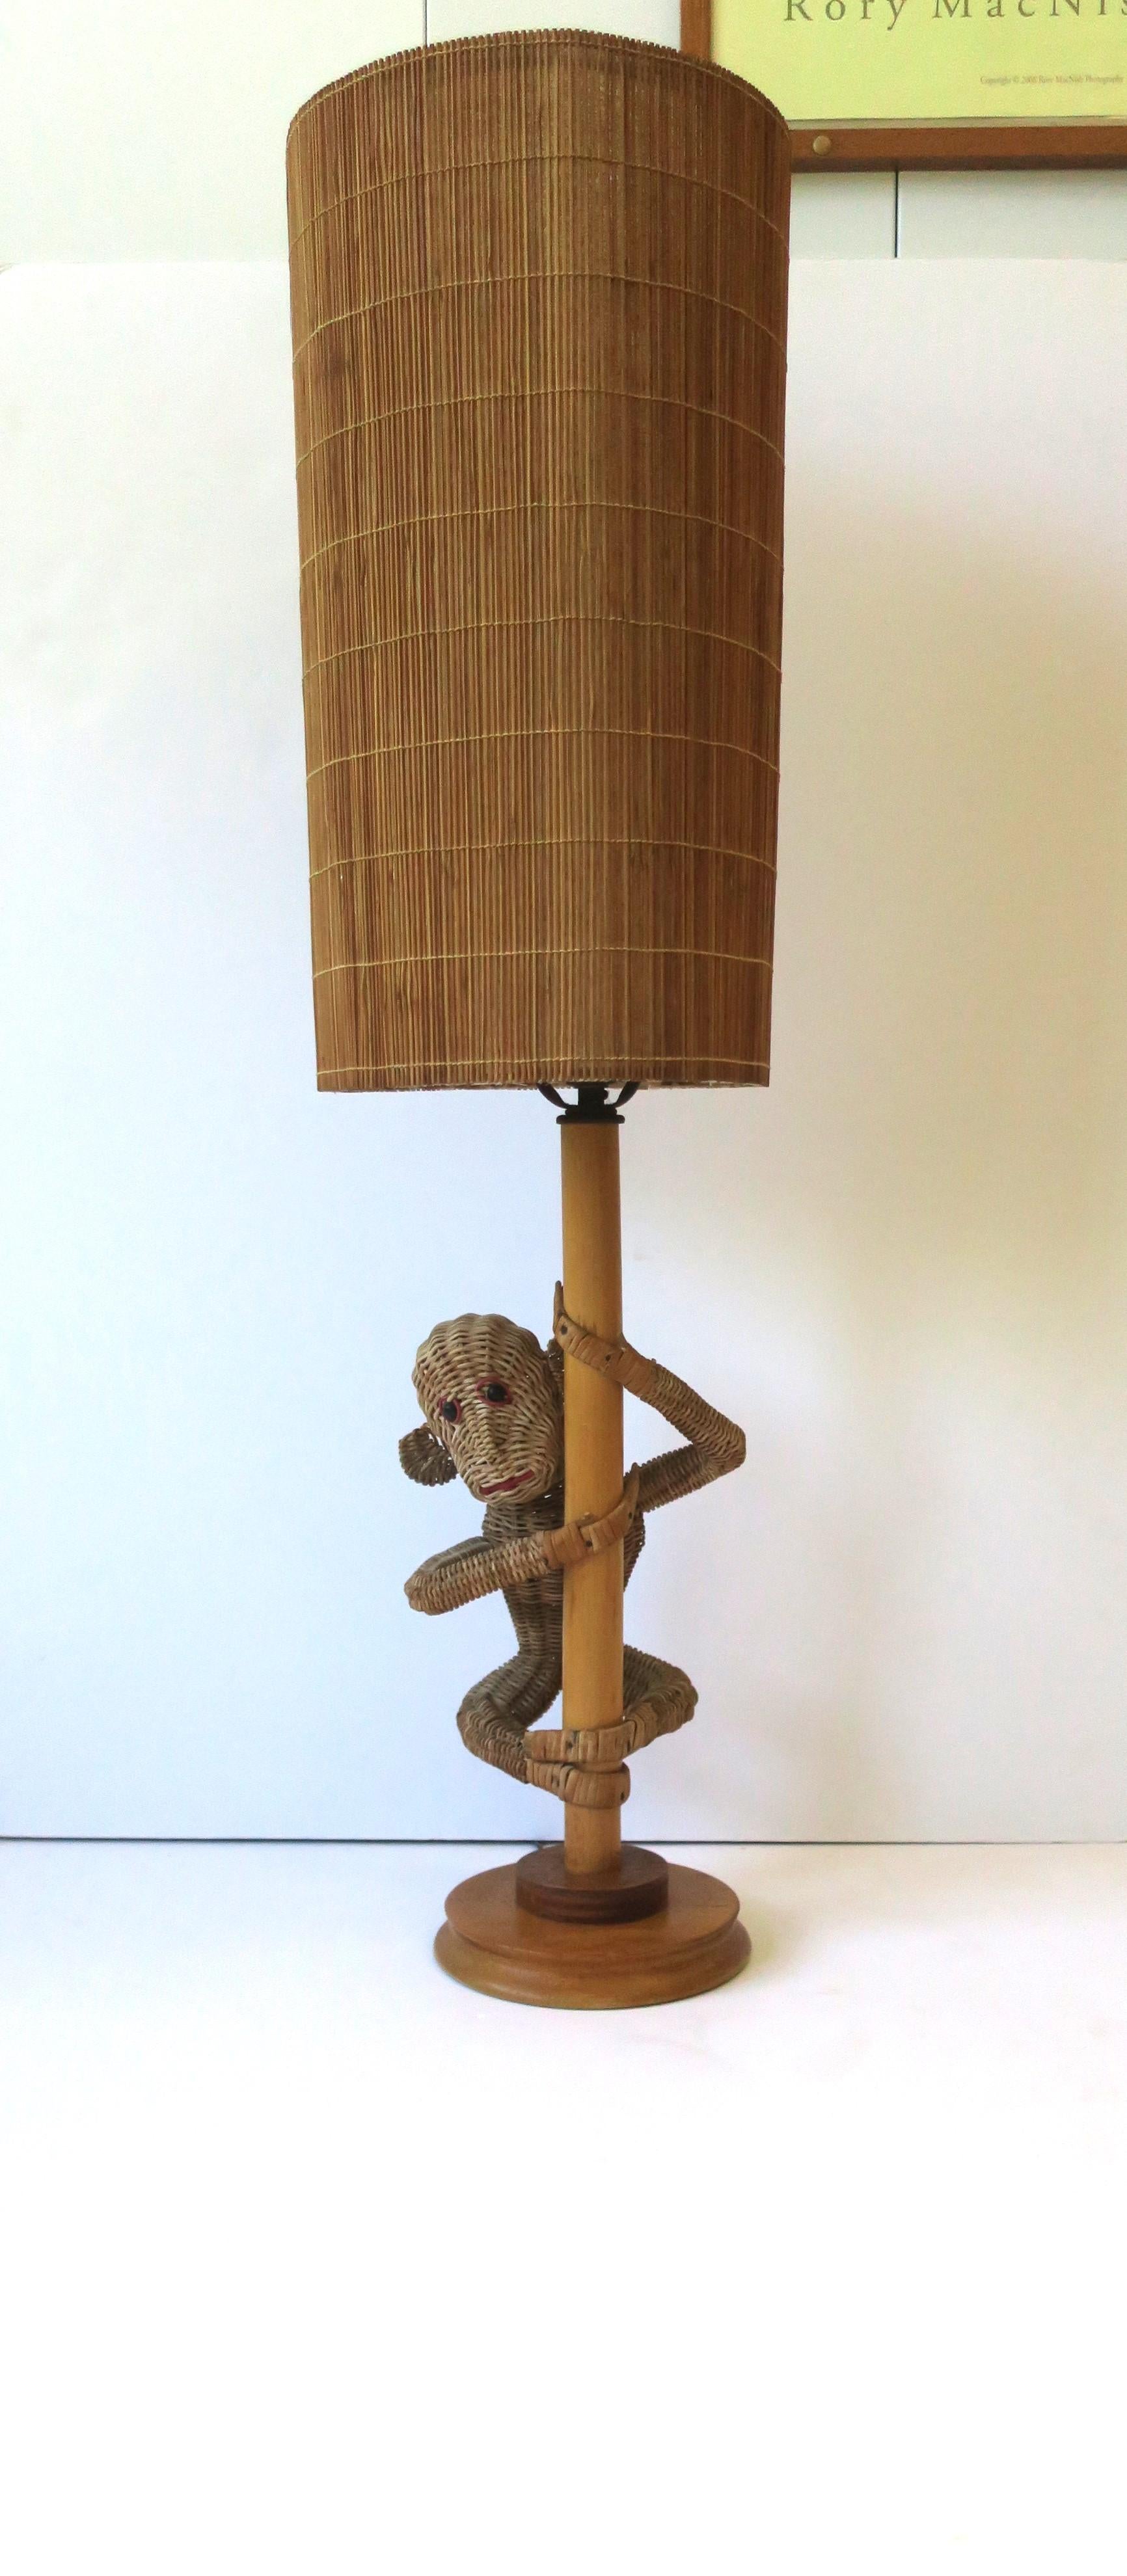 A wicker rattan monkey lamp with wicker shade, circa mid to late-20th century, late 1960s to early 1970s. Attributed to designer Mario Lopez Torres. Overall dimensions: 8